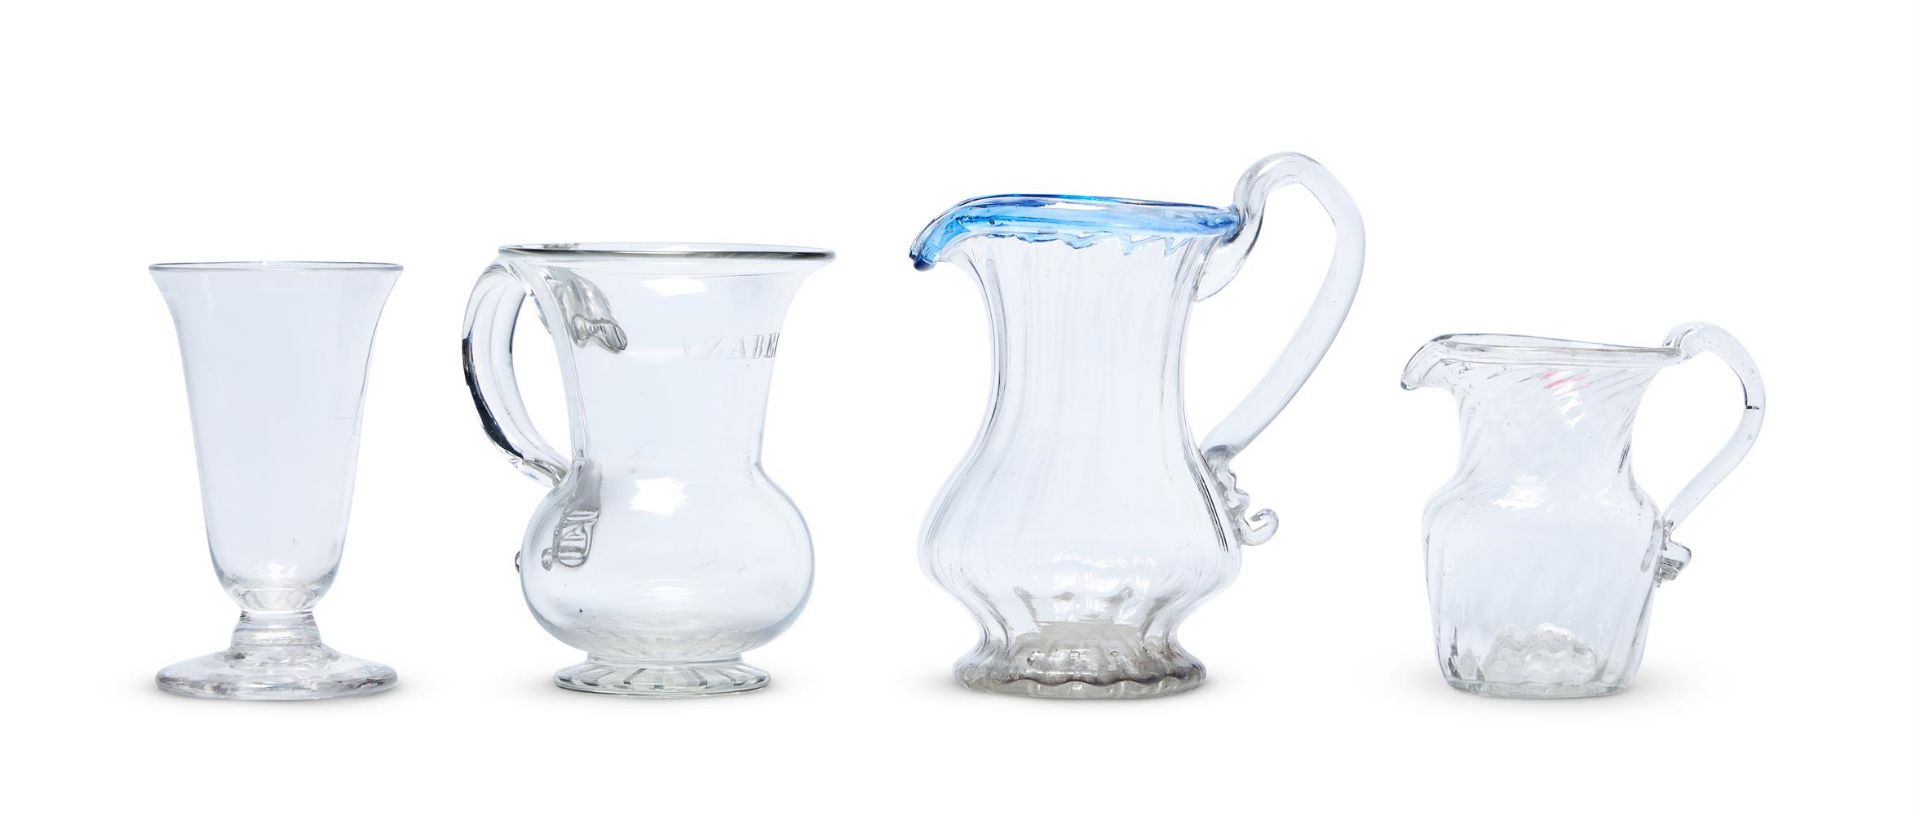 A SELECTION OF ENGLISH DOMESTIC GLASSLATE, 18TH AND 19TH CENTURY